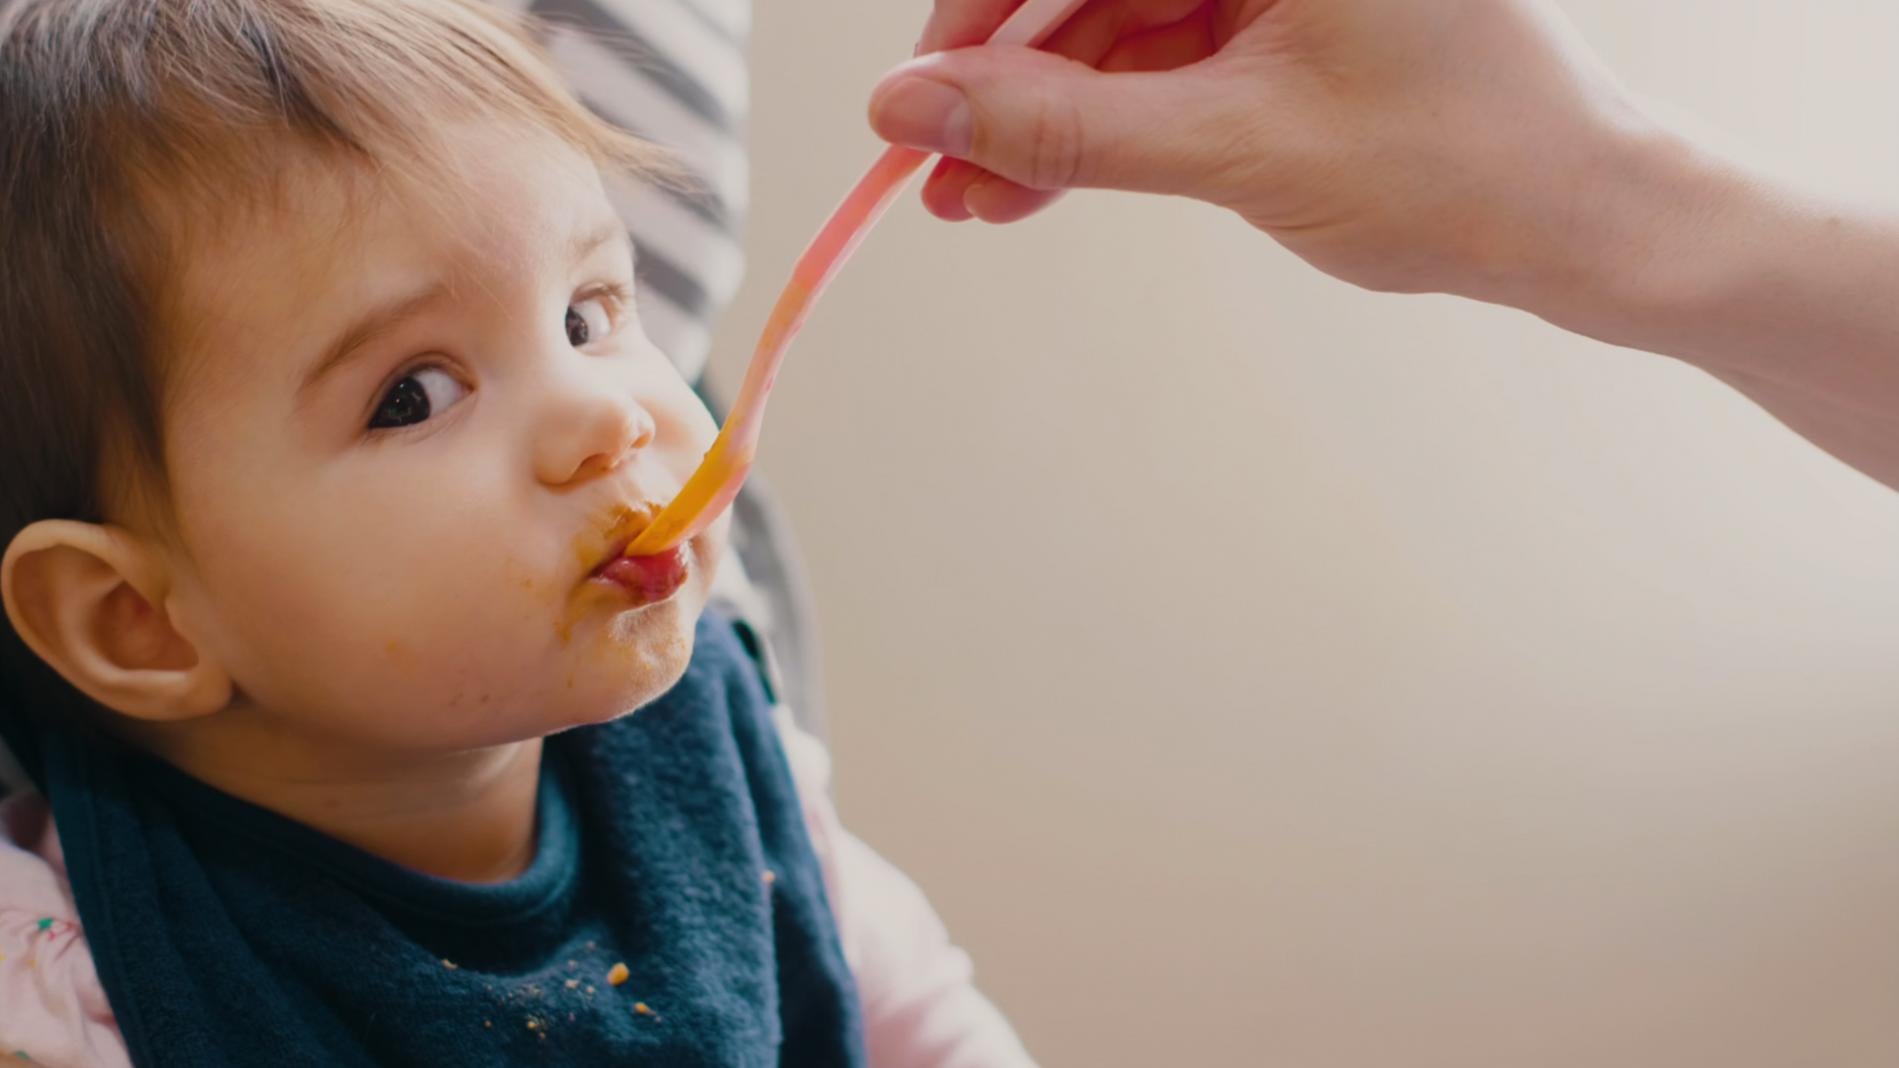 7 signs your baby is ready for solid foods